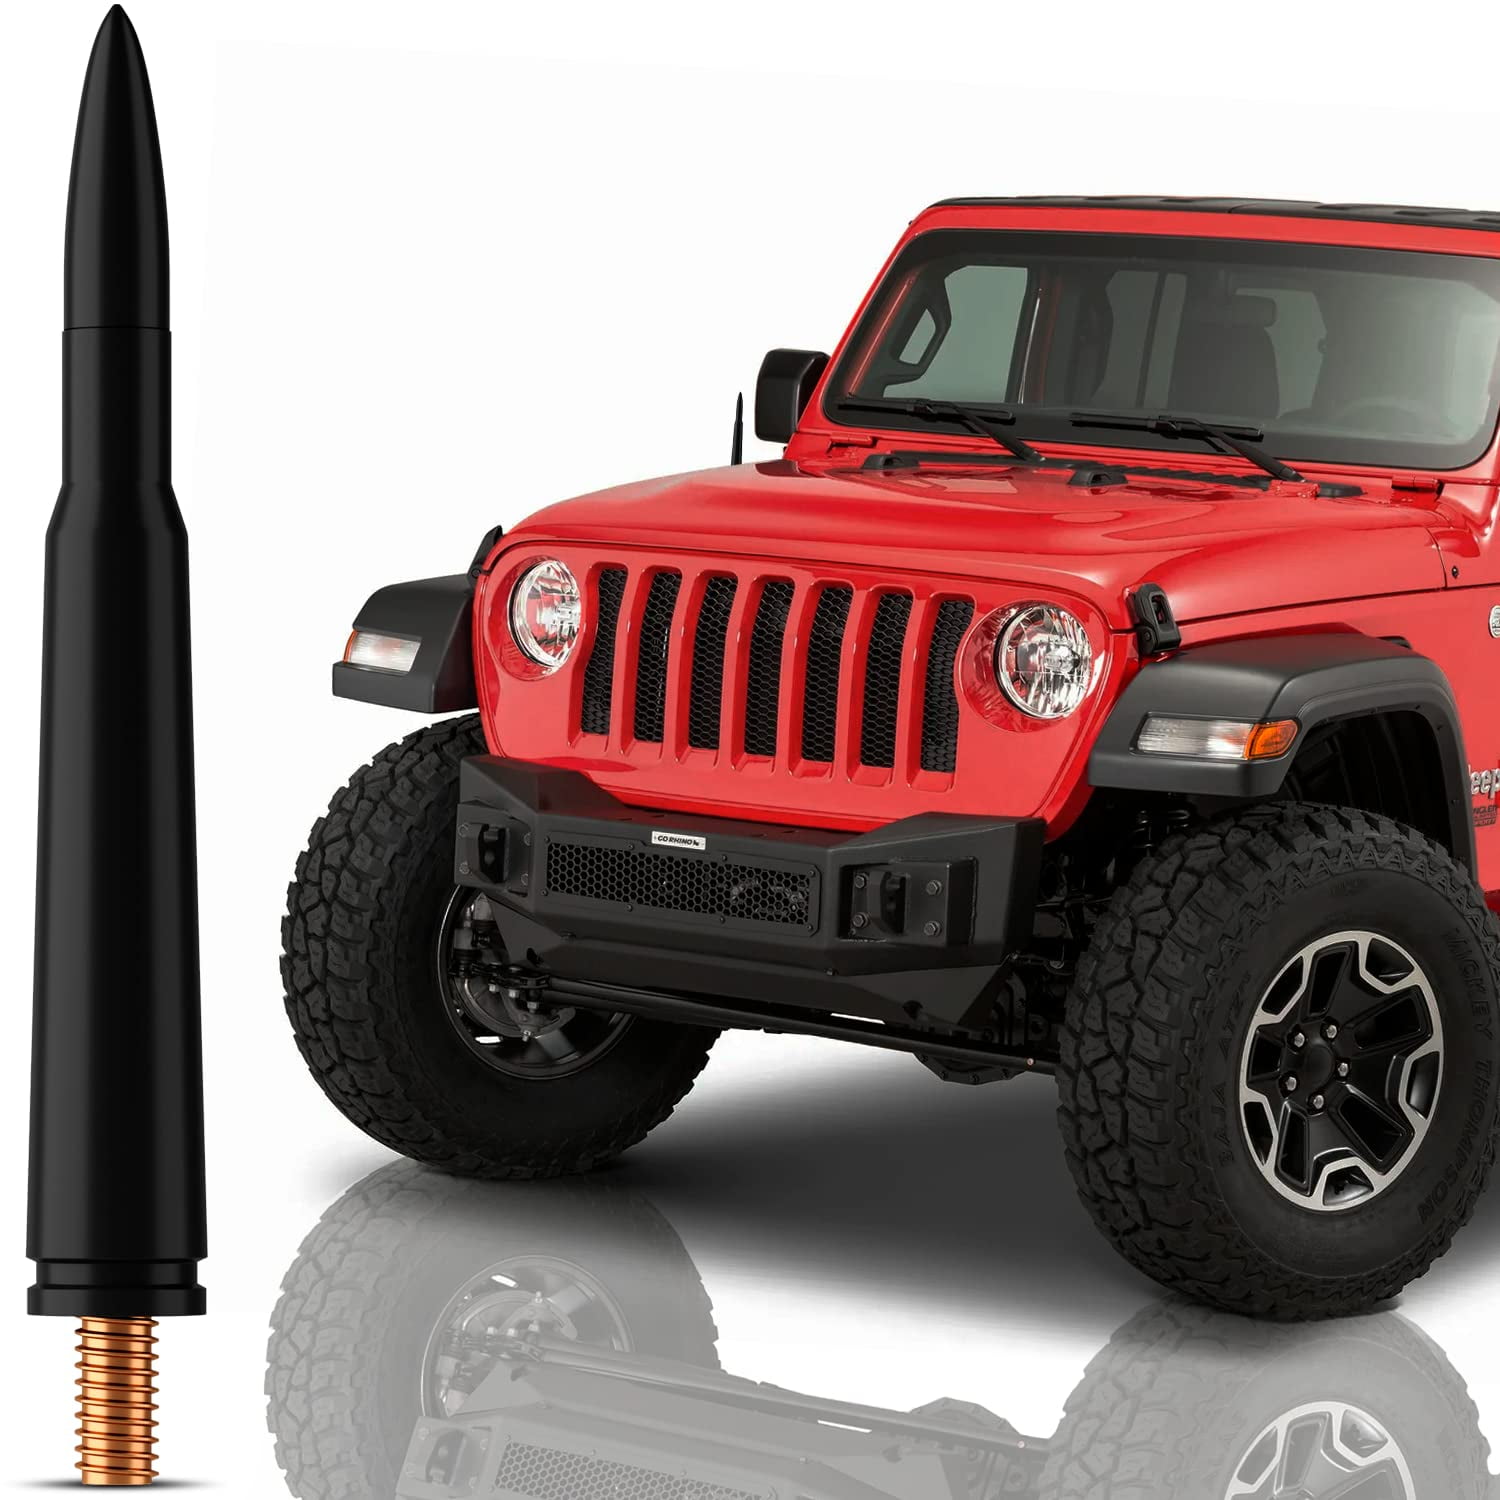 Bullet Antenna Mast for Jeep Wrangler JK JL Gladiator 2007 - 2023 - Highly  Durable Premium Truck Antenna - Car Wash-Proof Radio Antenna for FM AM - Best  Jeep Wrangler Accessories for